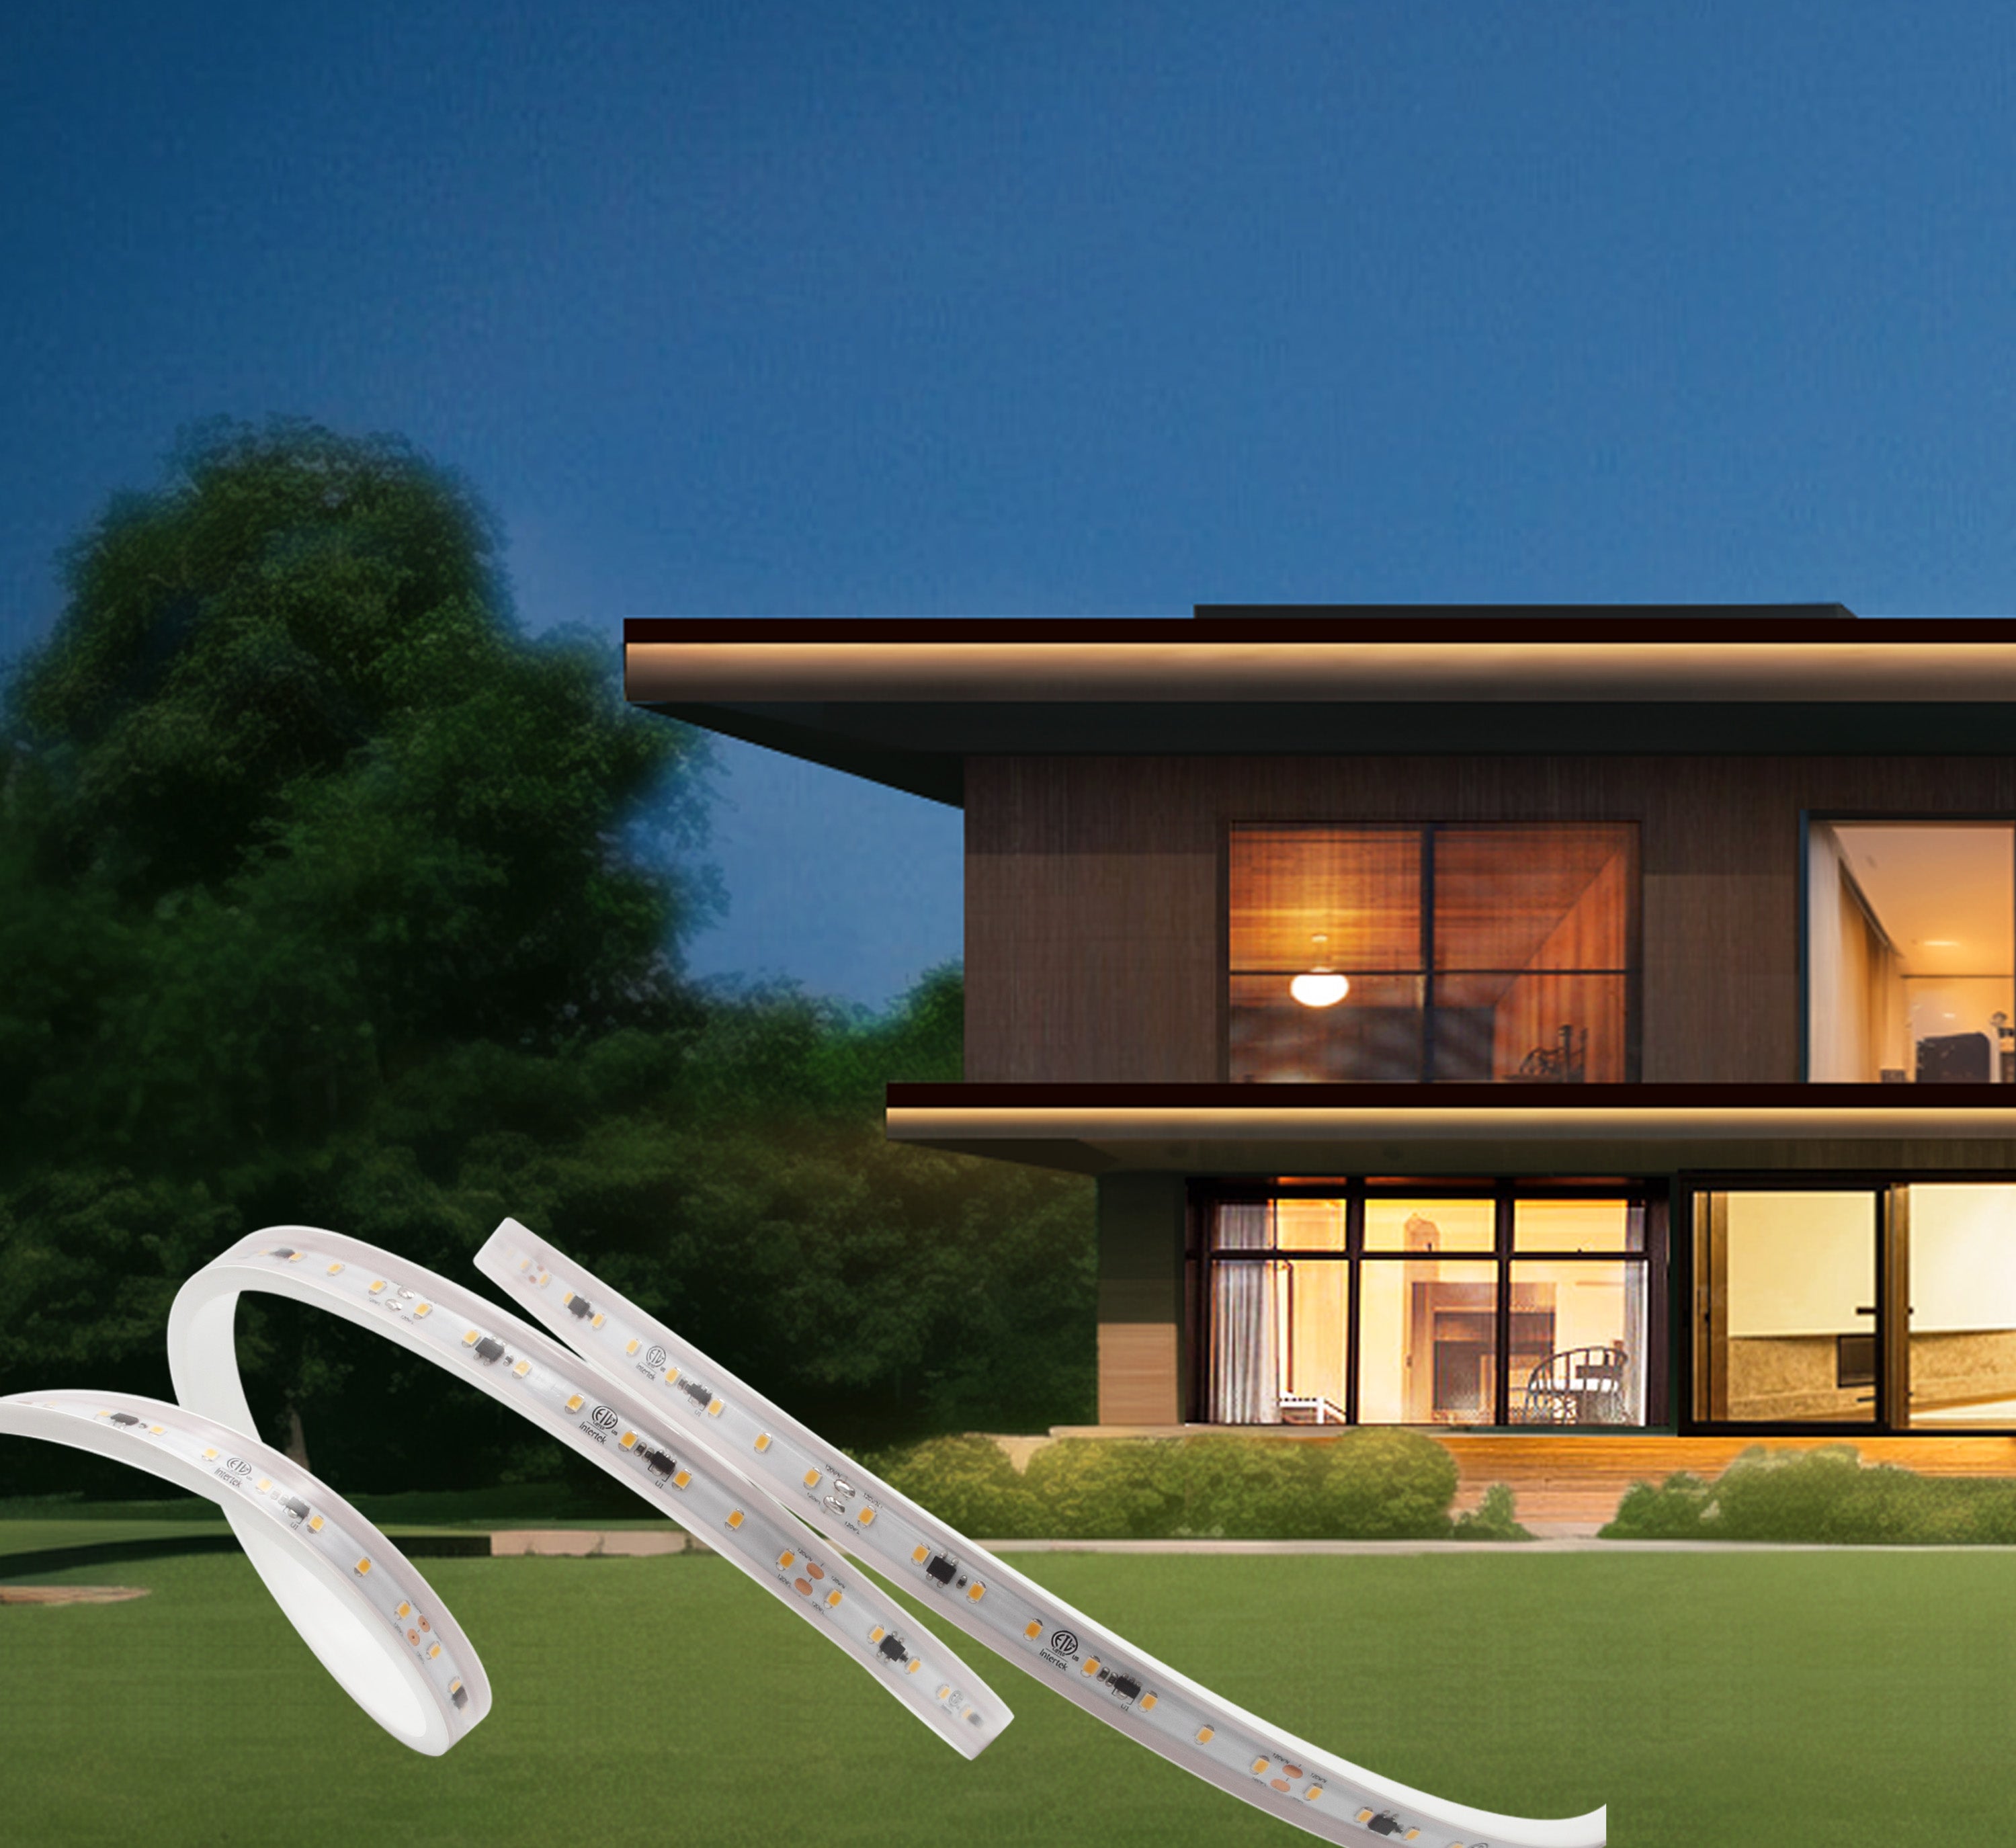 A modern home exterior at twilight featuring GL 120V LED strip lighting that accentuates the architectural details. The warm indoor lighting contrasts with the darkening sky, while a strip of LED lights curves dynamically in the foreground, indicating a home lighting solution. Lush greenery surrounds the property, enhancing the serene and upscale ambiance.